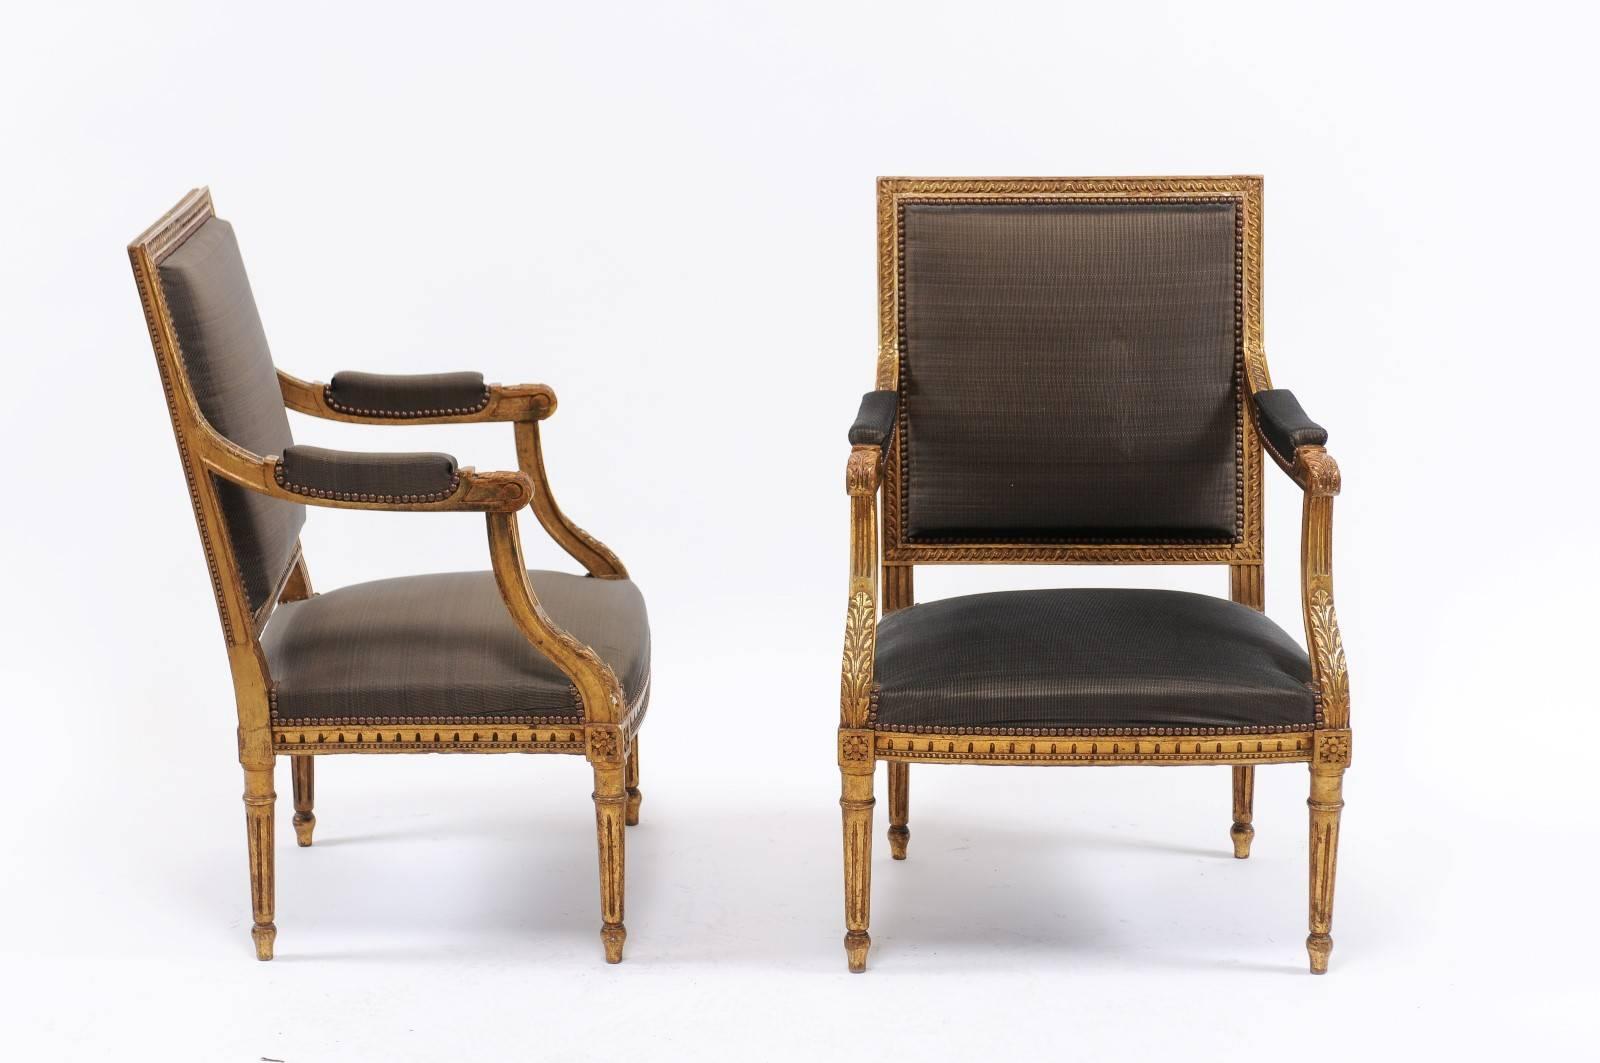 A pair of French giltwood upholstered armchairs of Louis XVI style with acanthus leaves carving, beaded molding, rosettes and fluted legs from the late 19th century. We flipped over this pair of Louis XVI-style armchairs, circa the late 19th